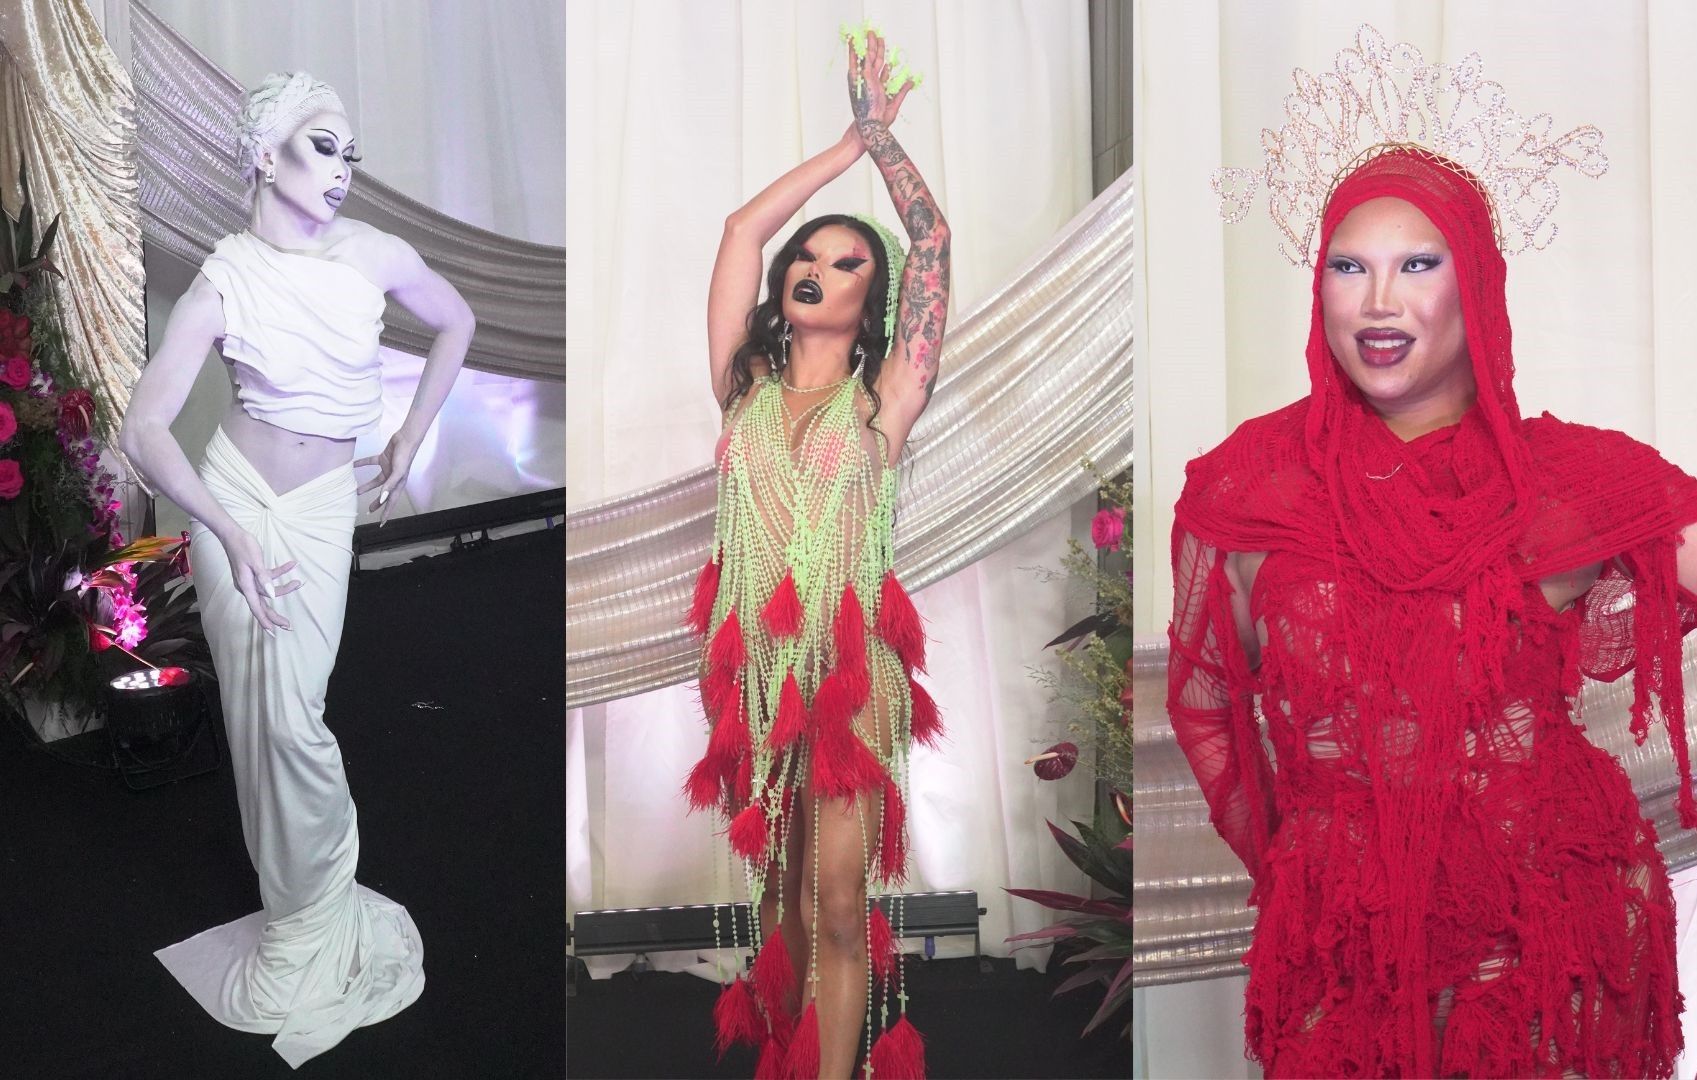 'Drag Race Philippines' queens give mythology new meaning at Opulence Ball